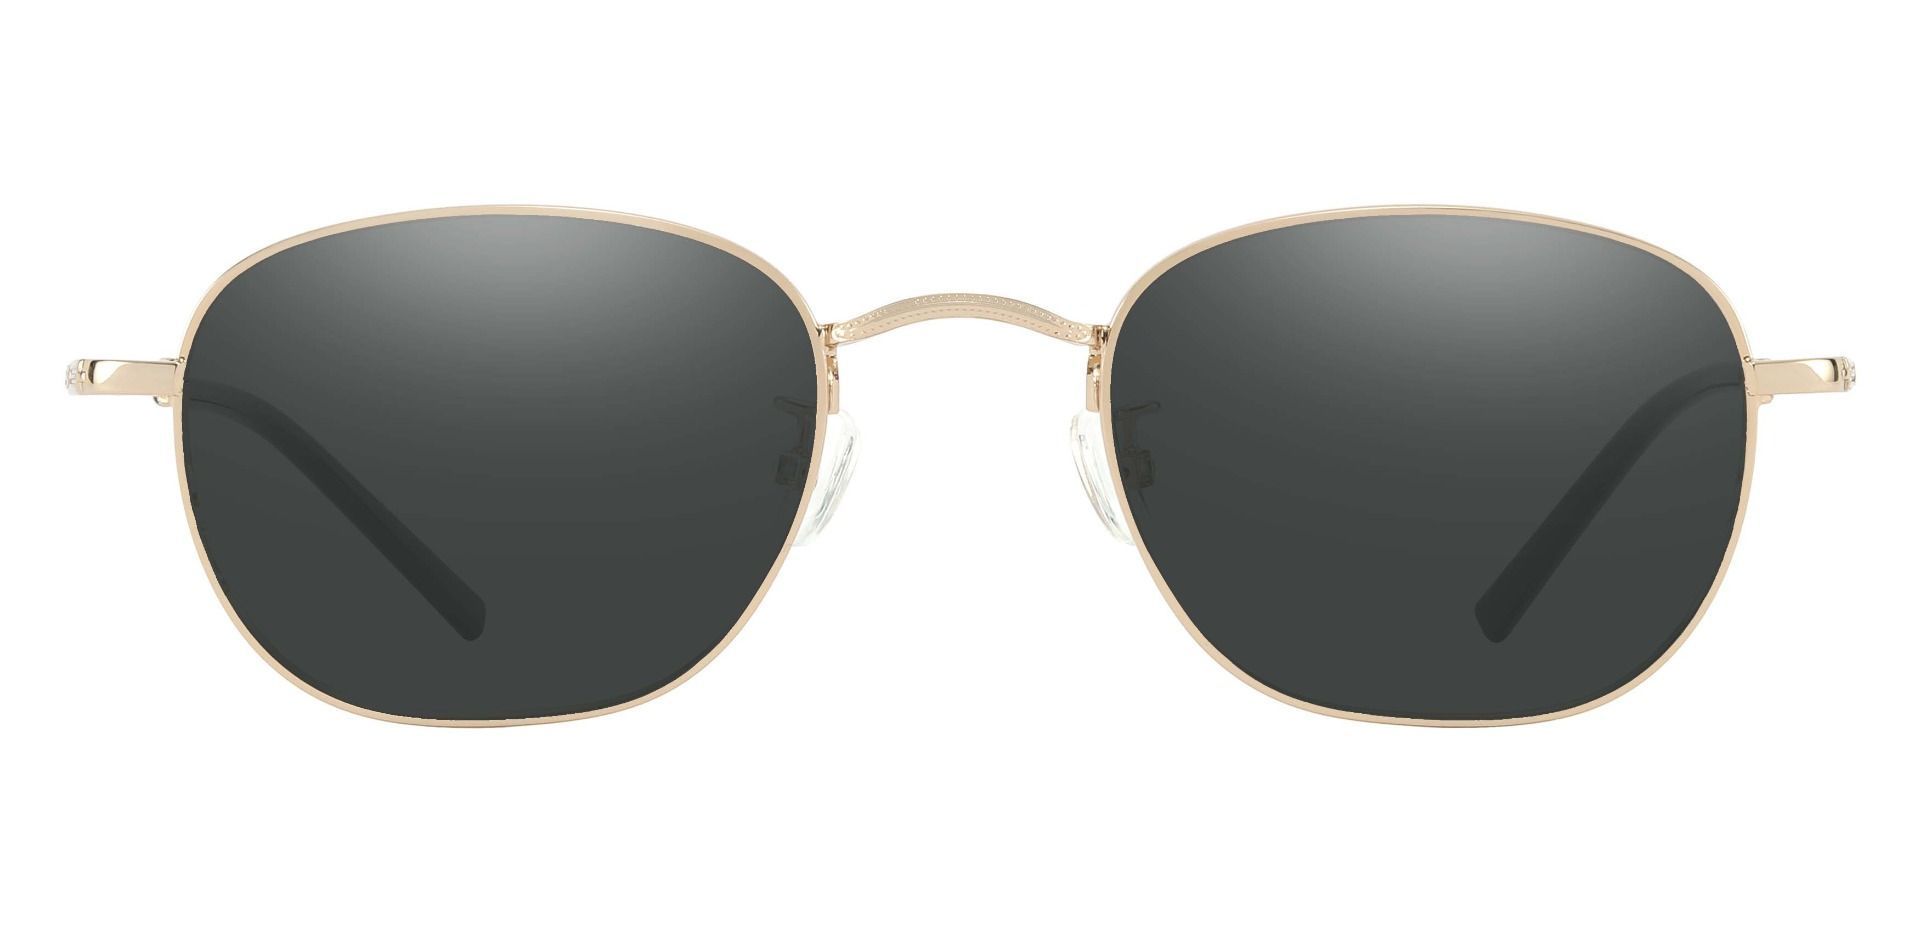 Greece Square Lined Bifocal Sunglasses - Gold Frame With Gray Lenses